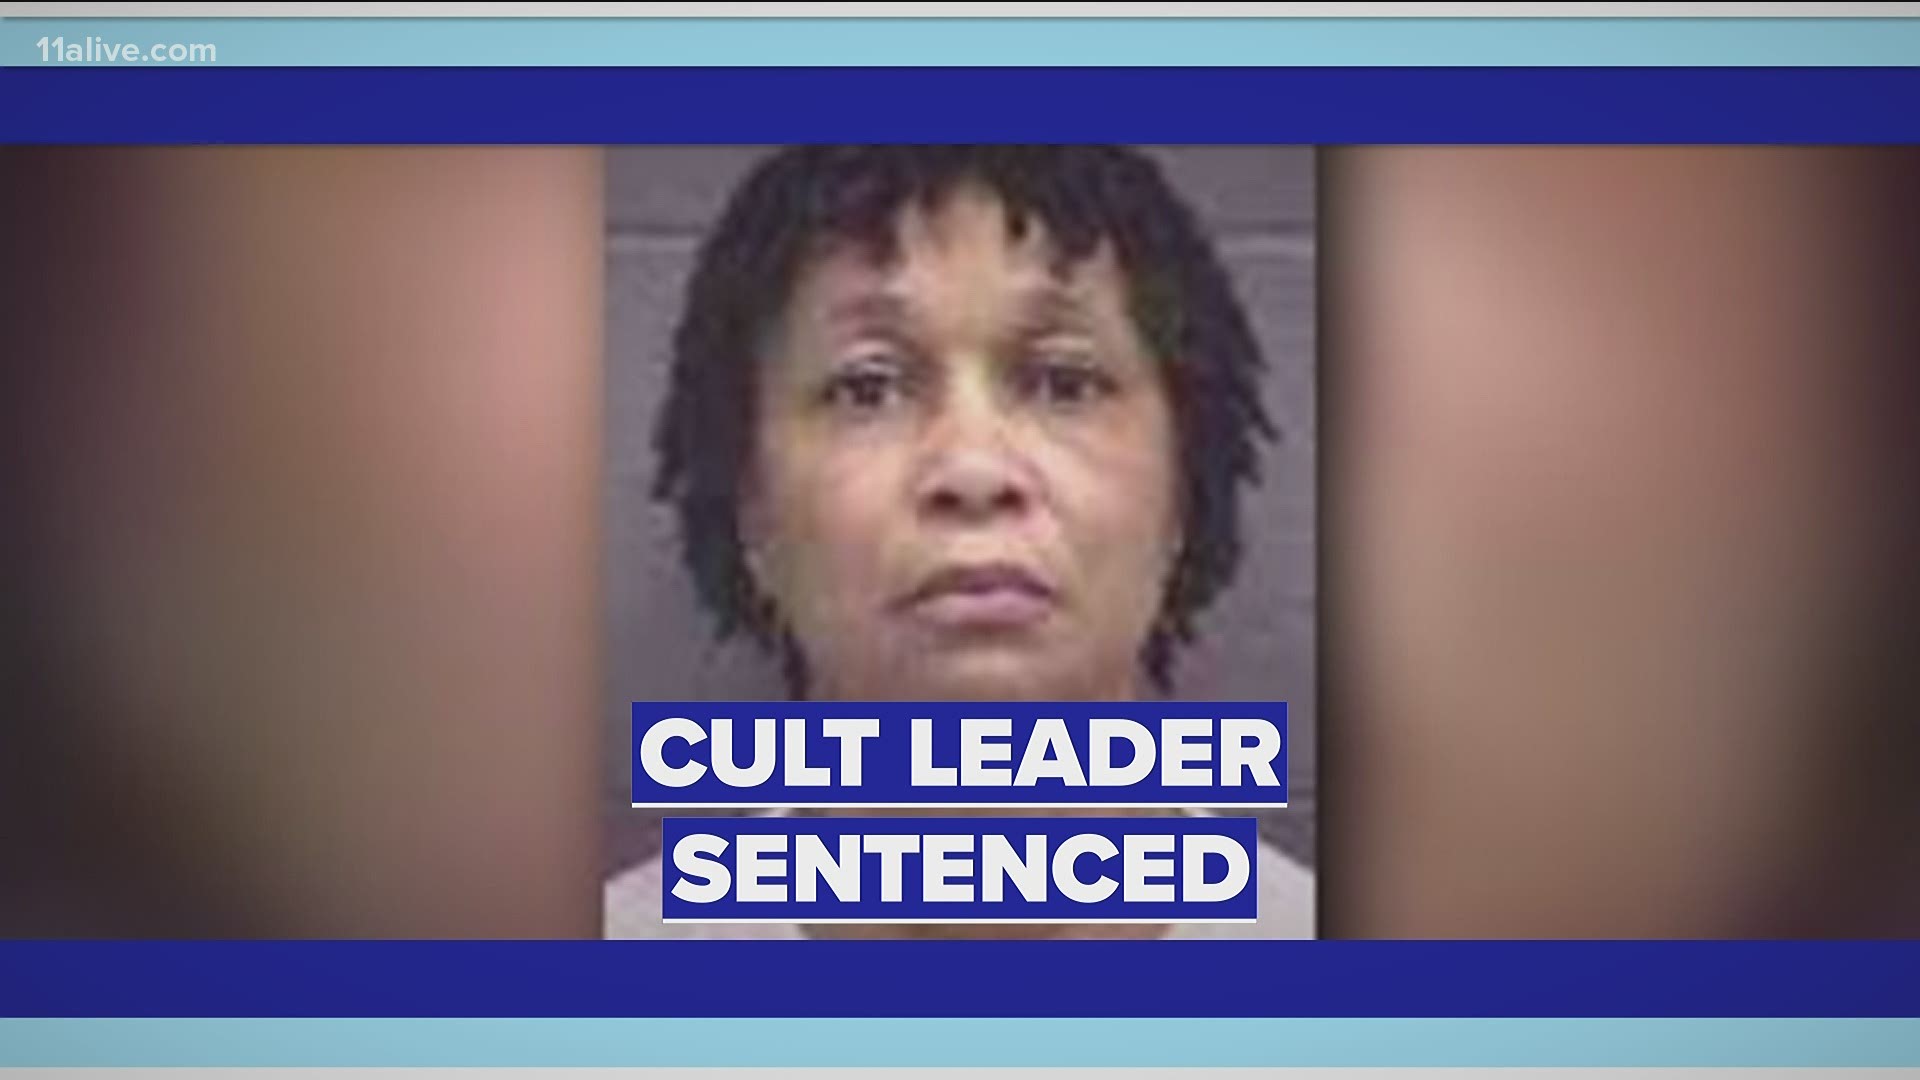 79-year-old Anna Elizabeth Young who ran the "House of Prayer" cult in Florida in the '80s was sentenced to 30 years behind bars after pleading no contest to charges